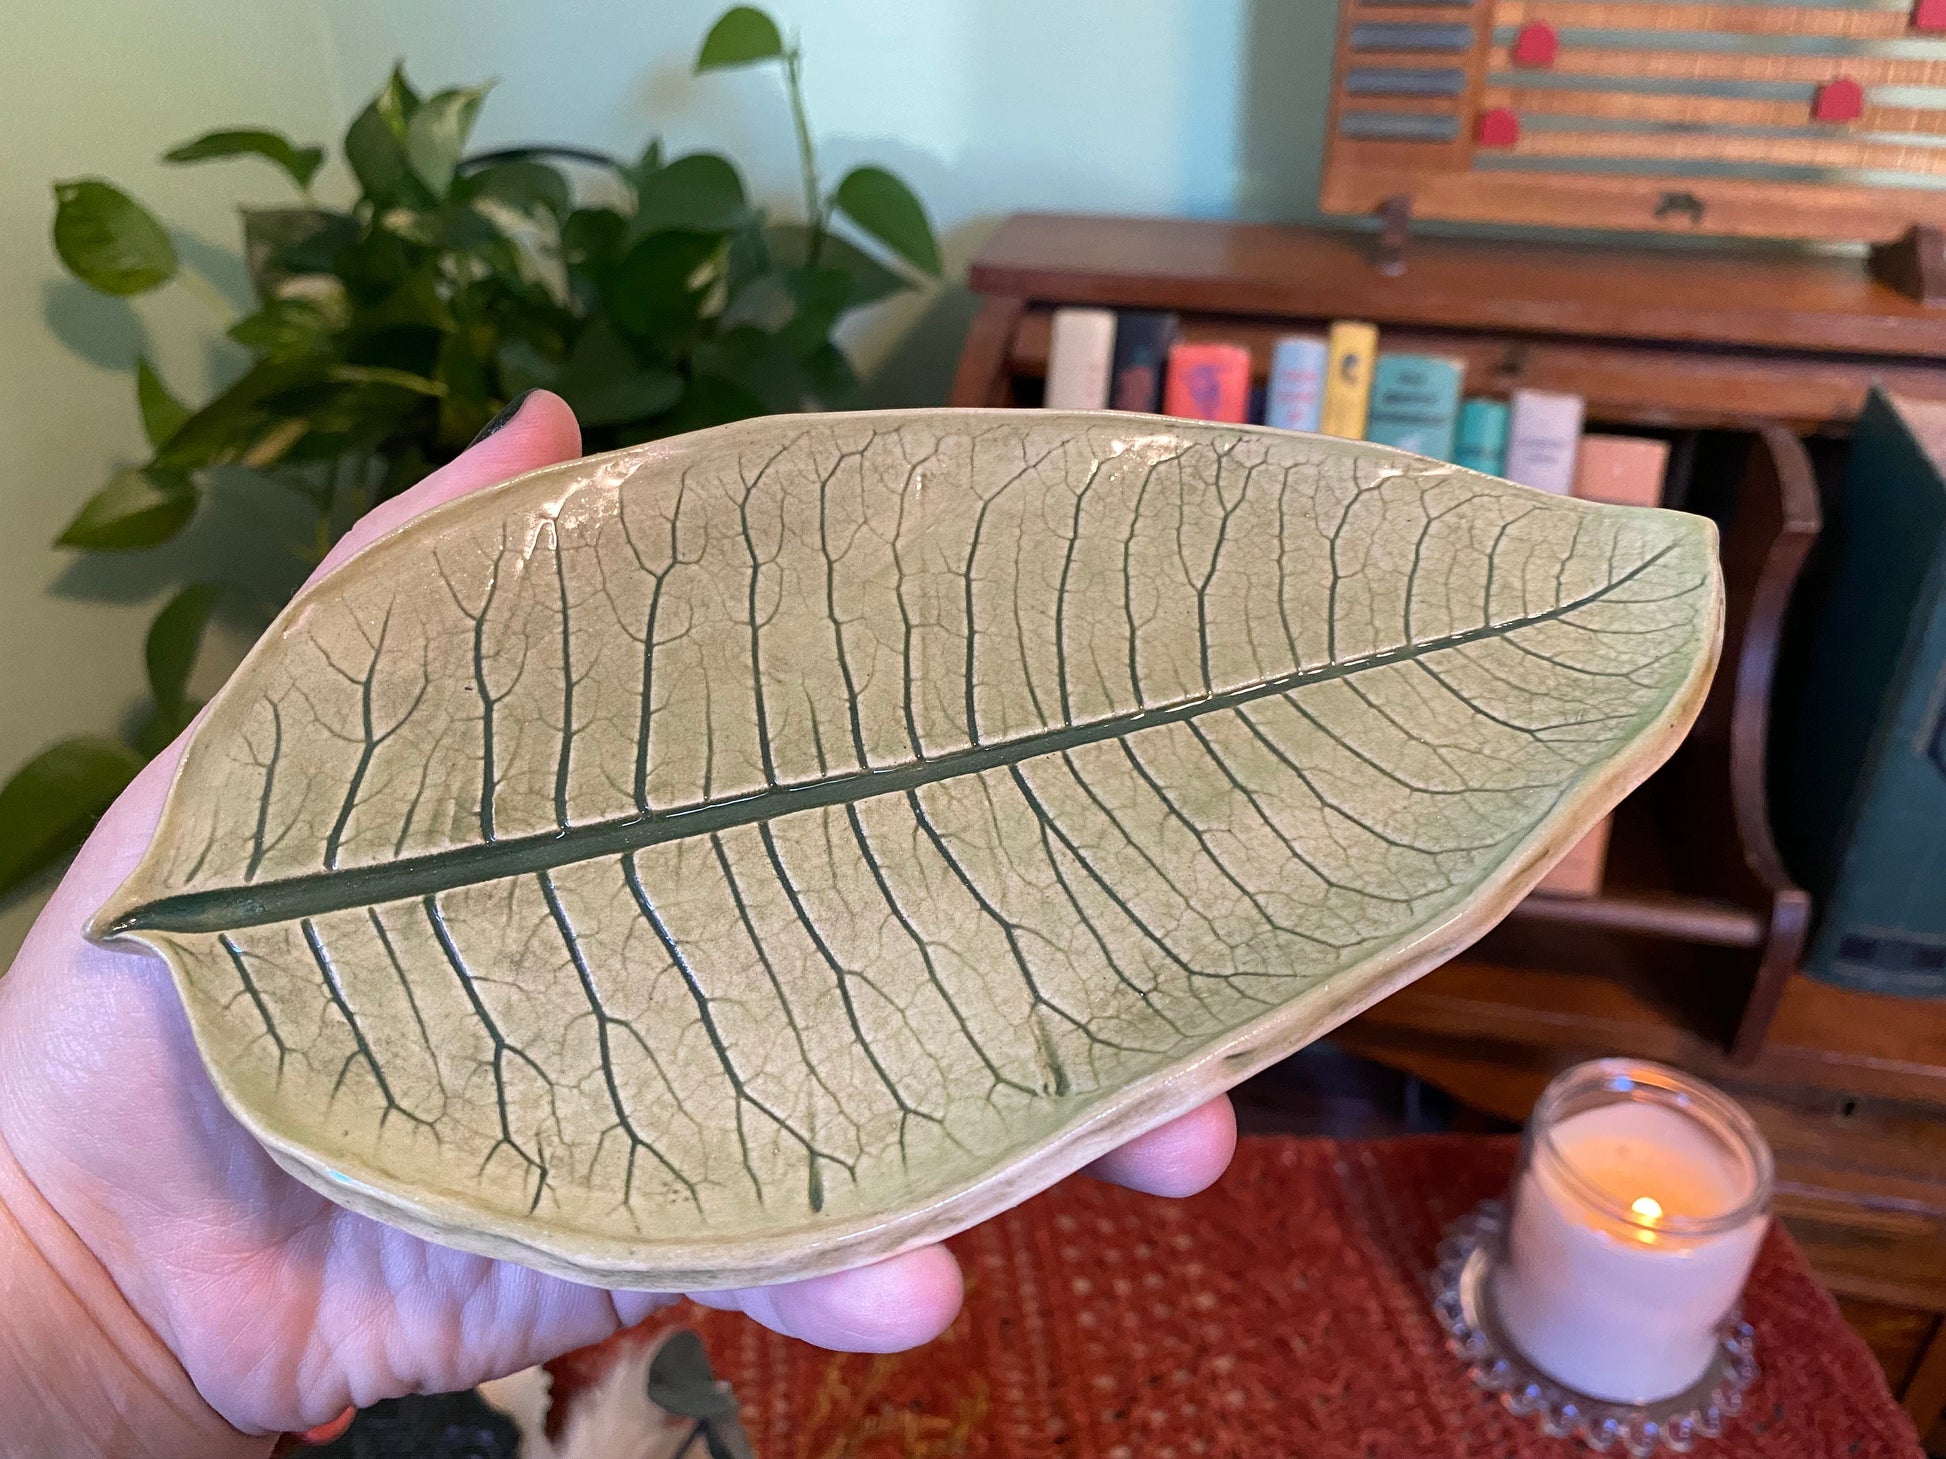 Handmade ceramic milkweed dish. Handcrafted pressed leaf pottery jewelry tray. Green botanical home decor. Gift for native plant gardener.